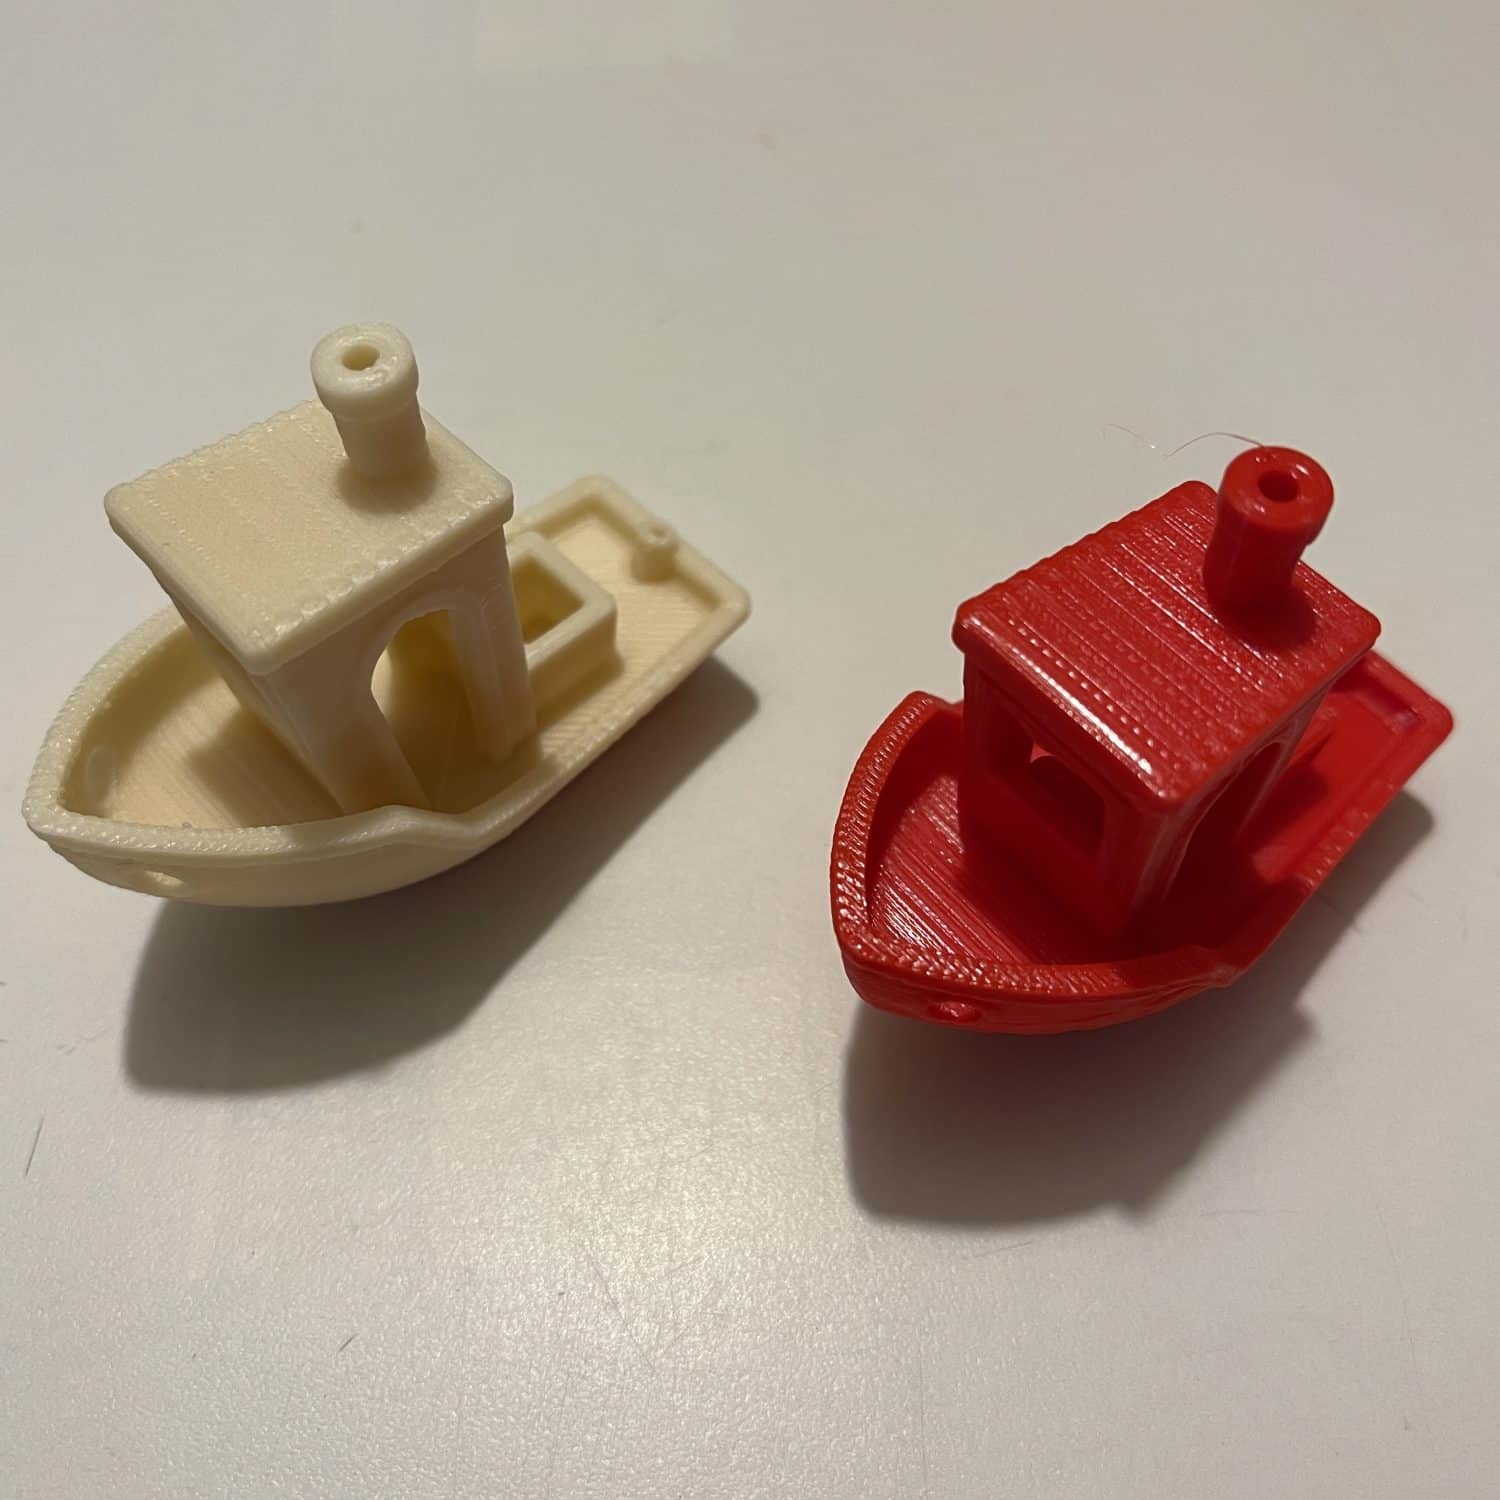 anycubic-vyper-benchy-dessus